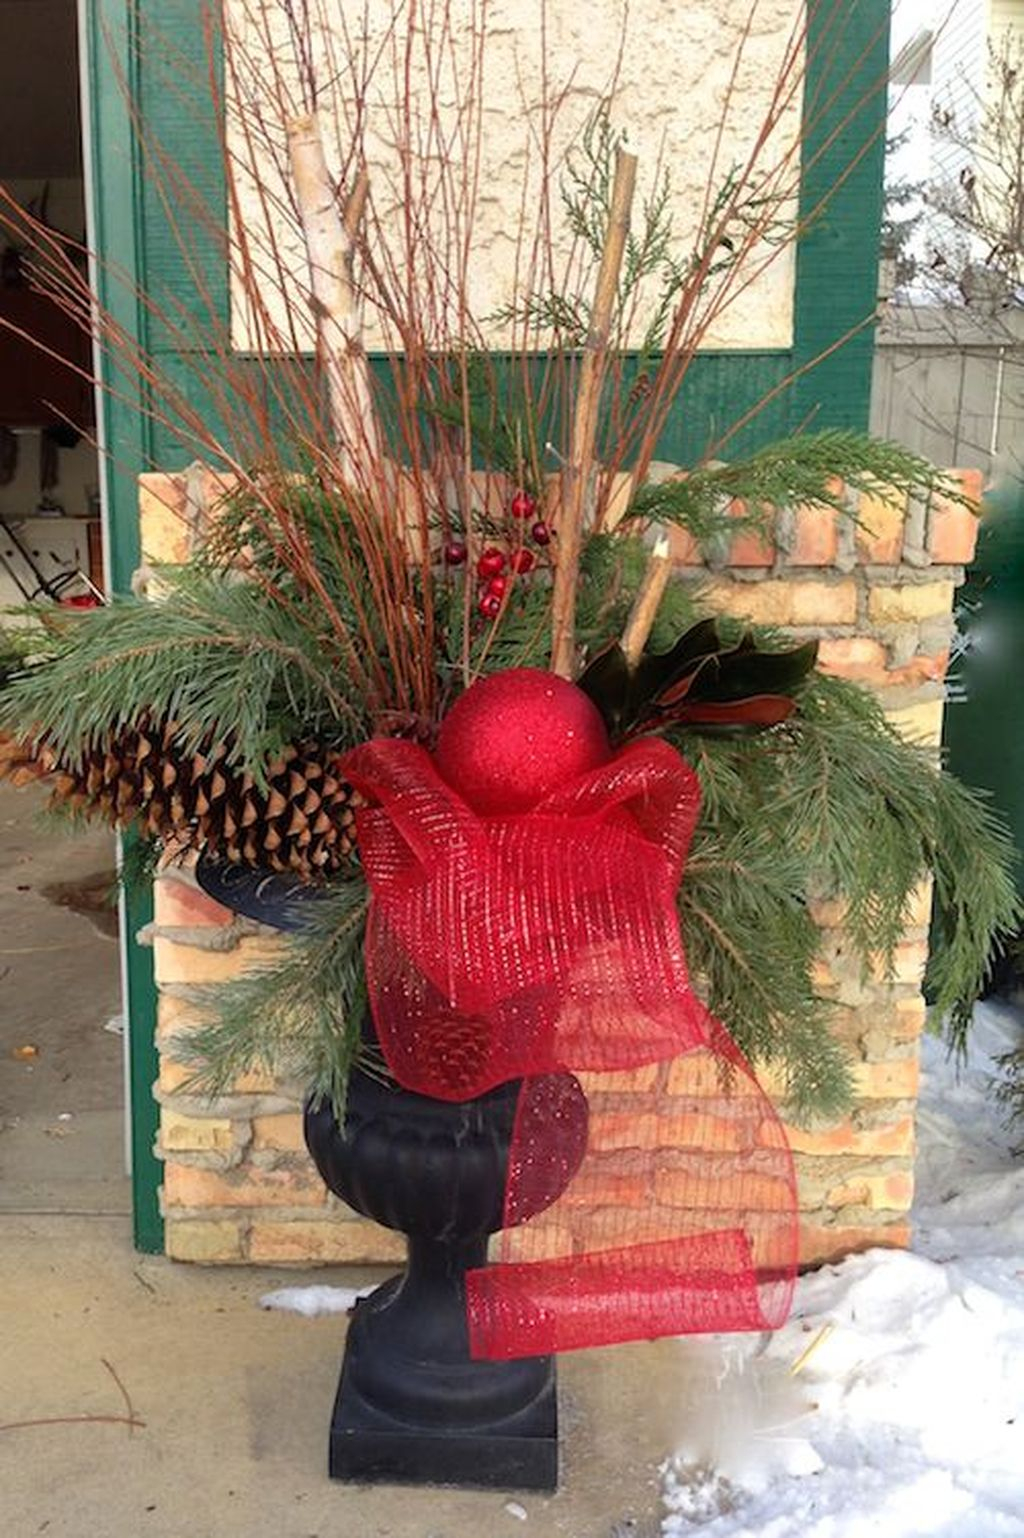 Marvelous Outdoor Holiday Planter Ideas To Beauty Porch Décor 41